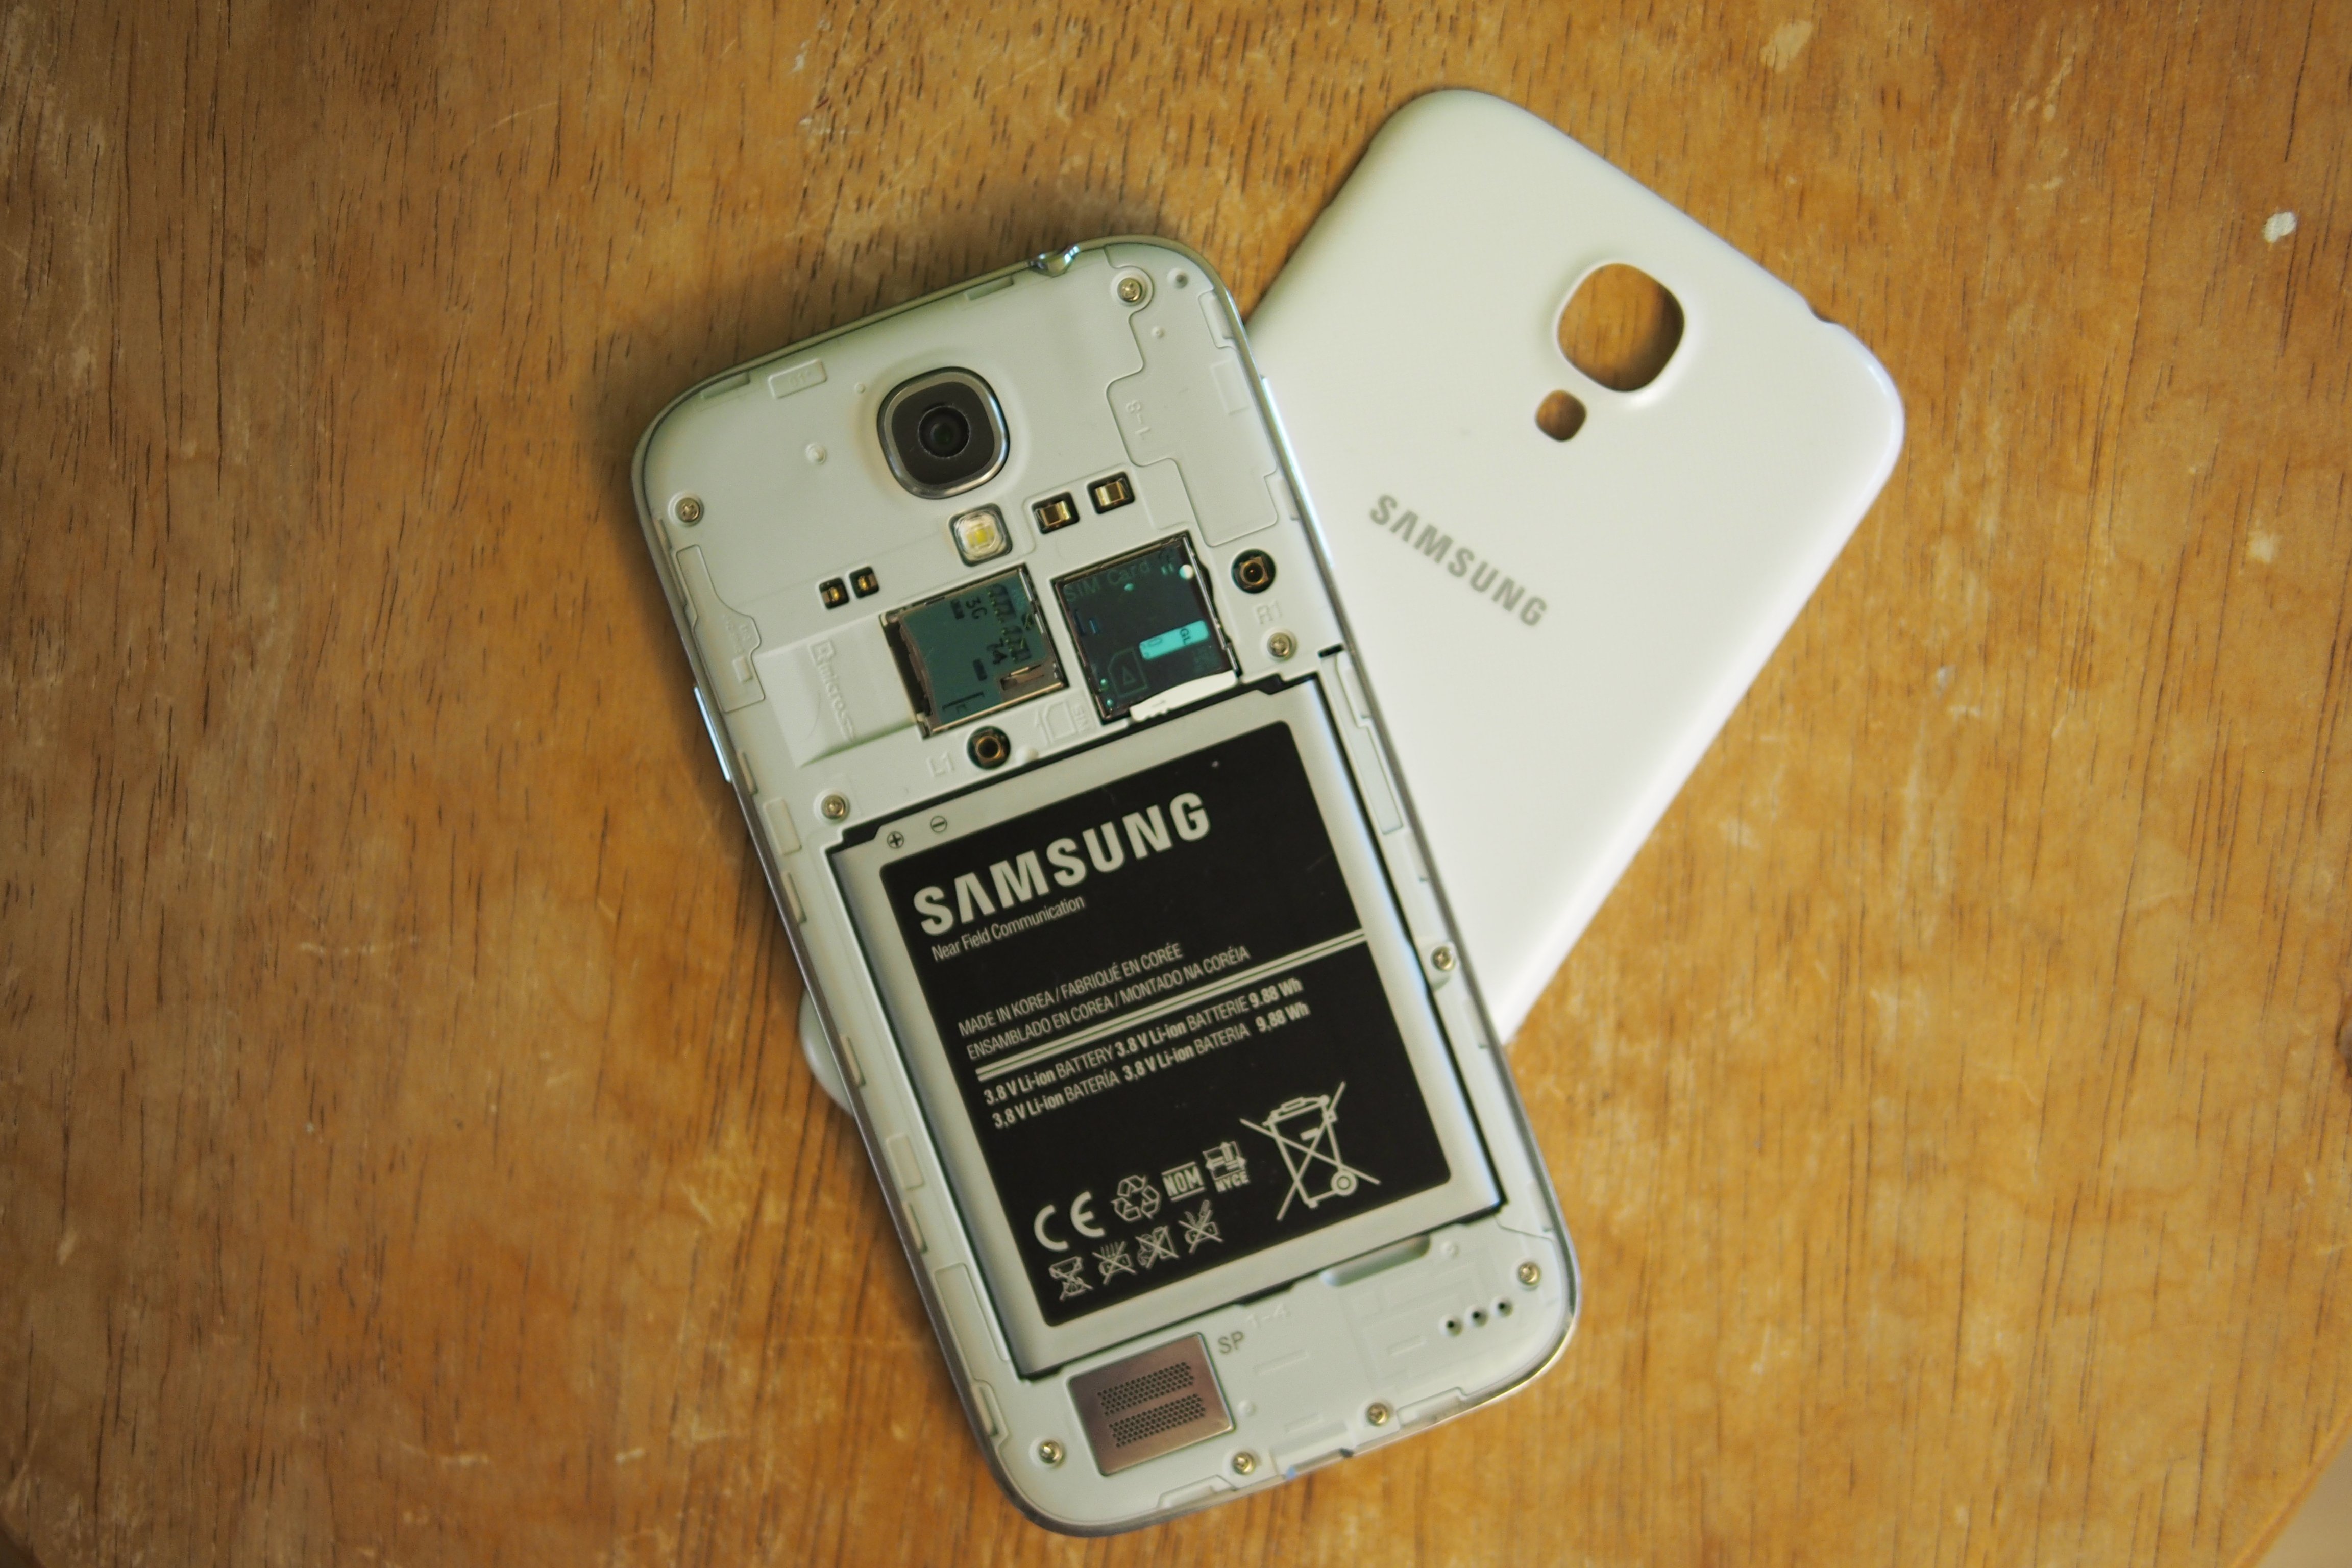 The Samsung Galaxy S4 is facing delays due to high demand.